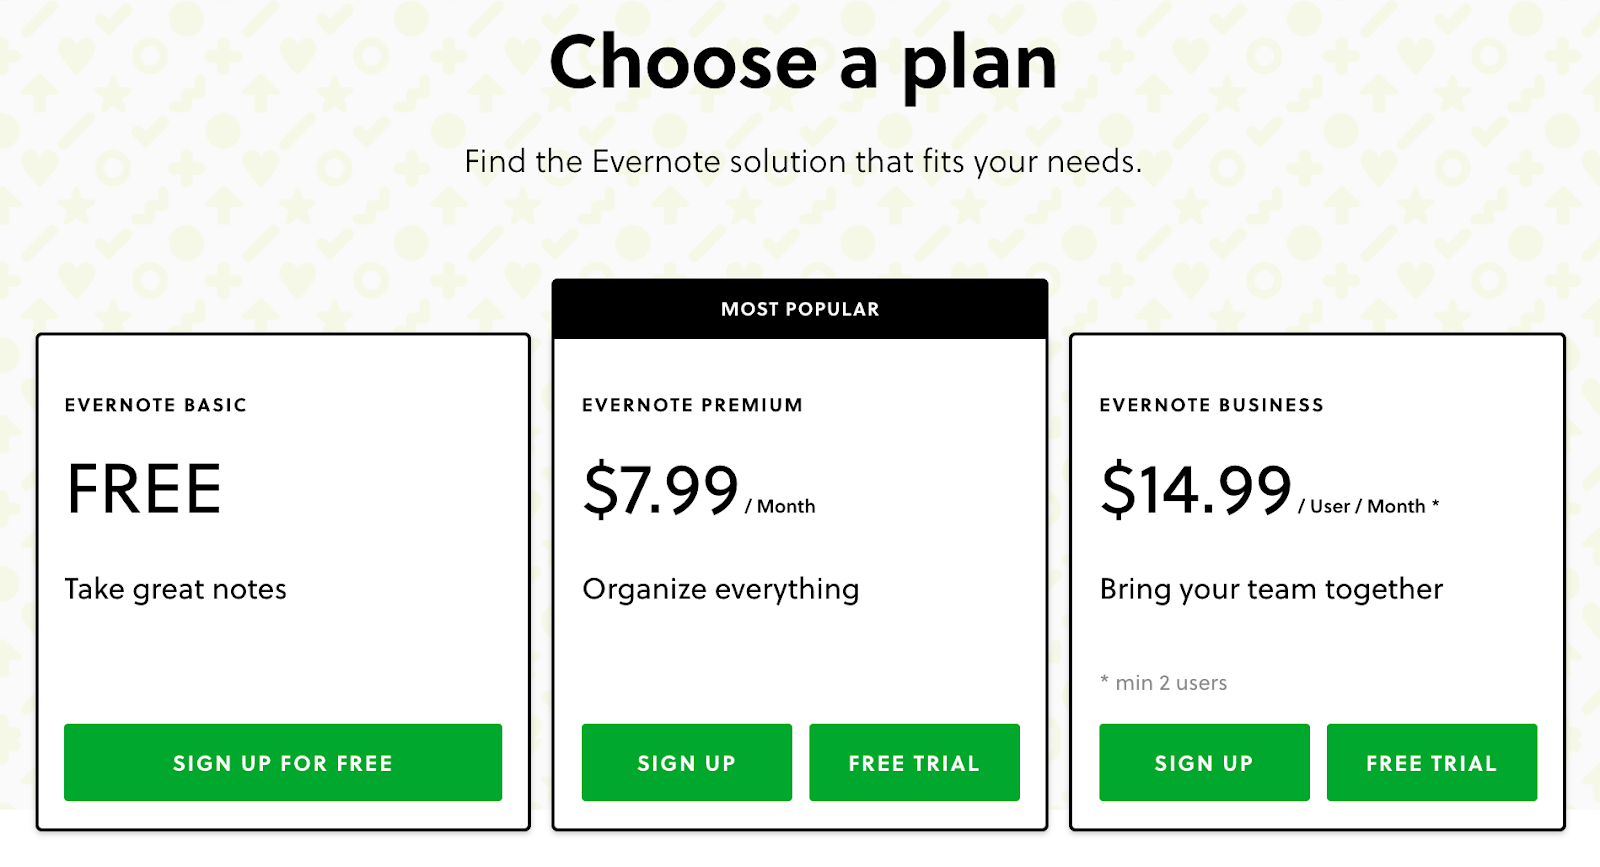 Evernote Pricing - Are Any of the Plans Worth It?